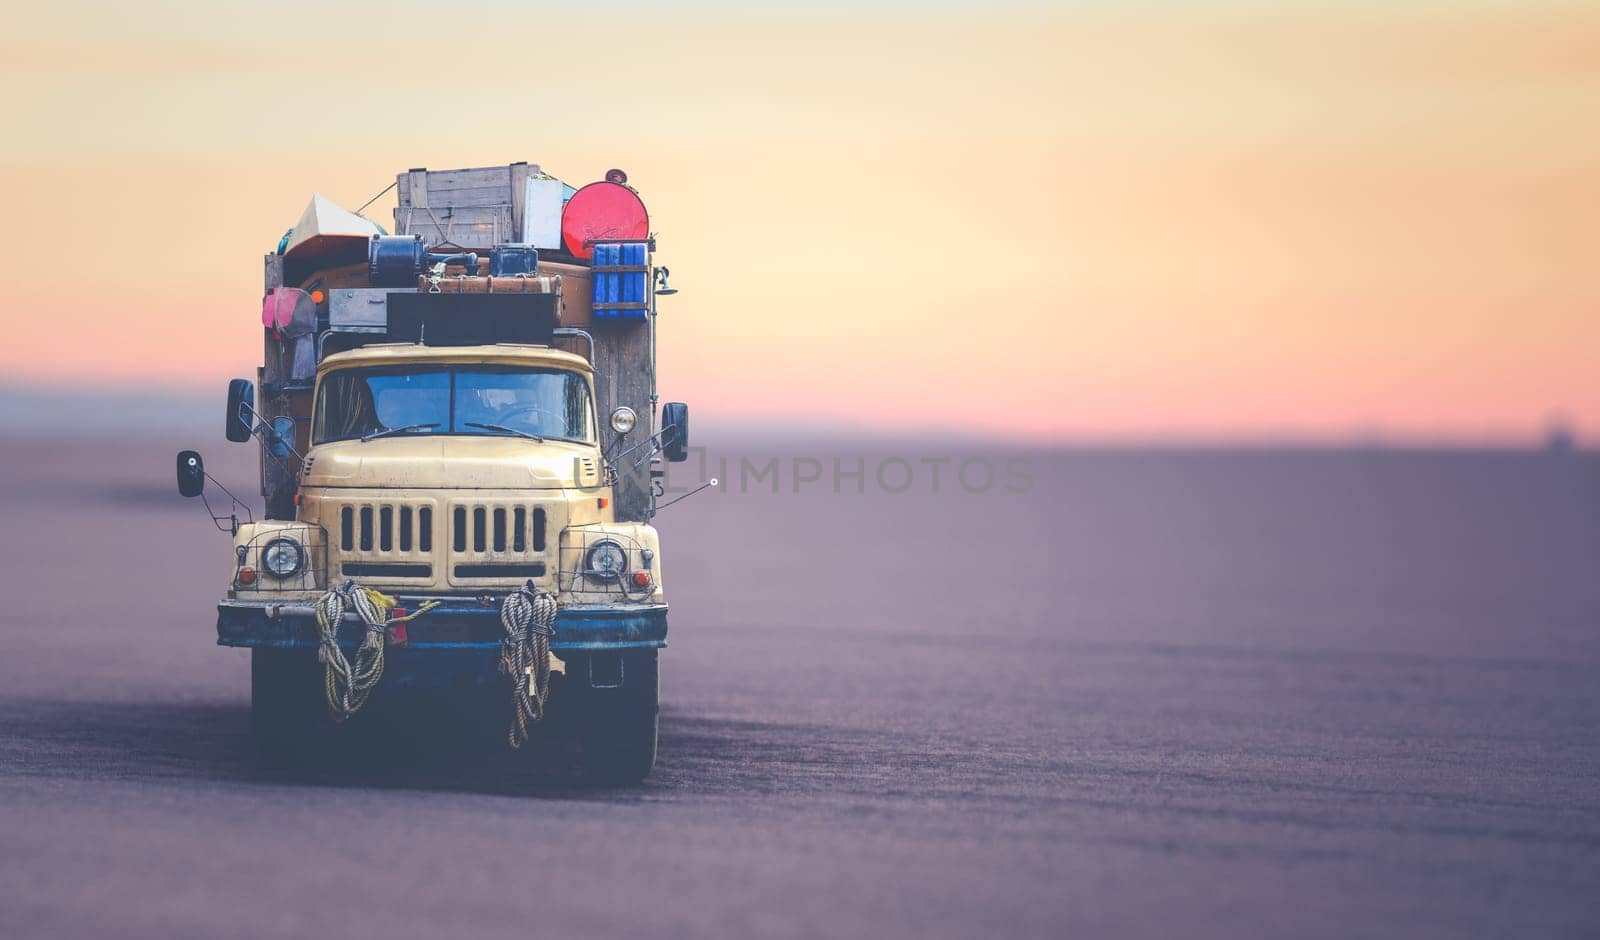 Vintage Expedition Truck In The African Desert At Sunset With Copy Space